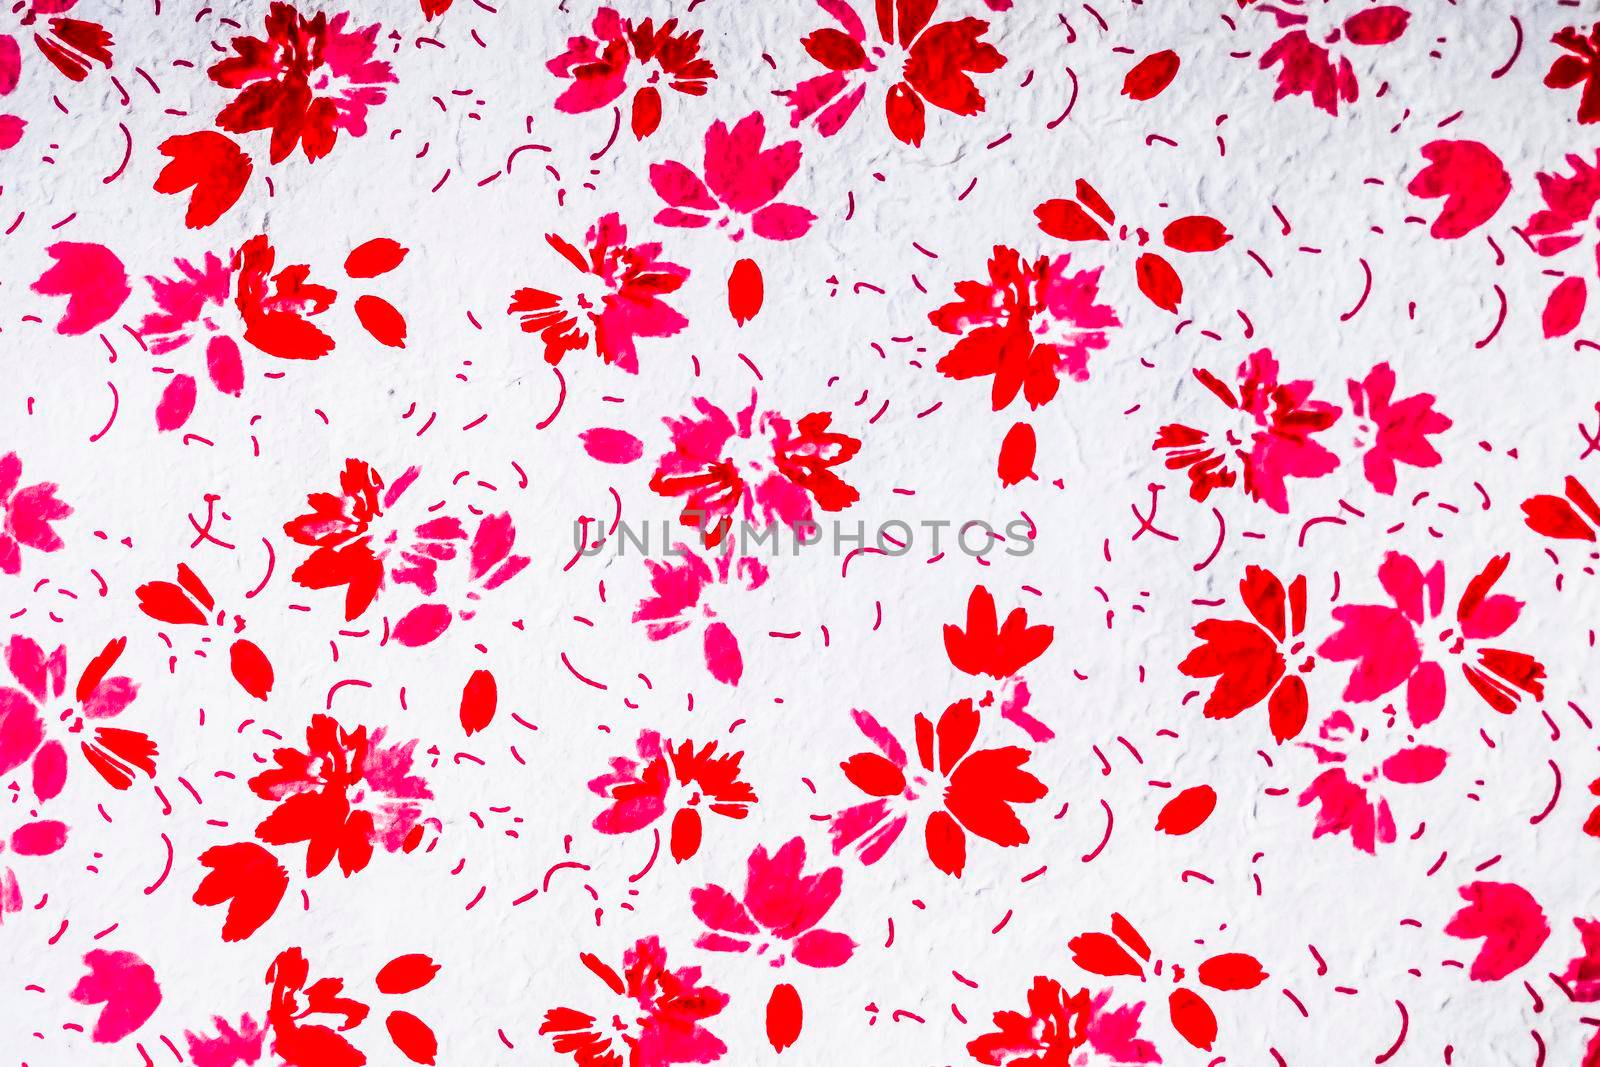 Seamless red floral texture made of petals fiber japanese paper pattern on a white background